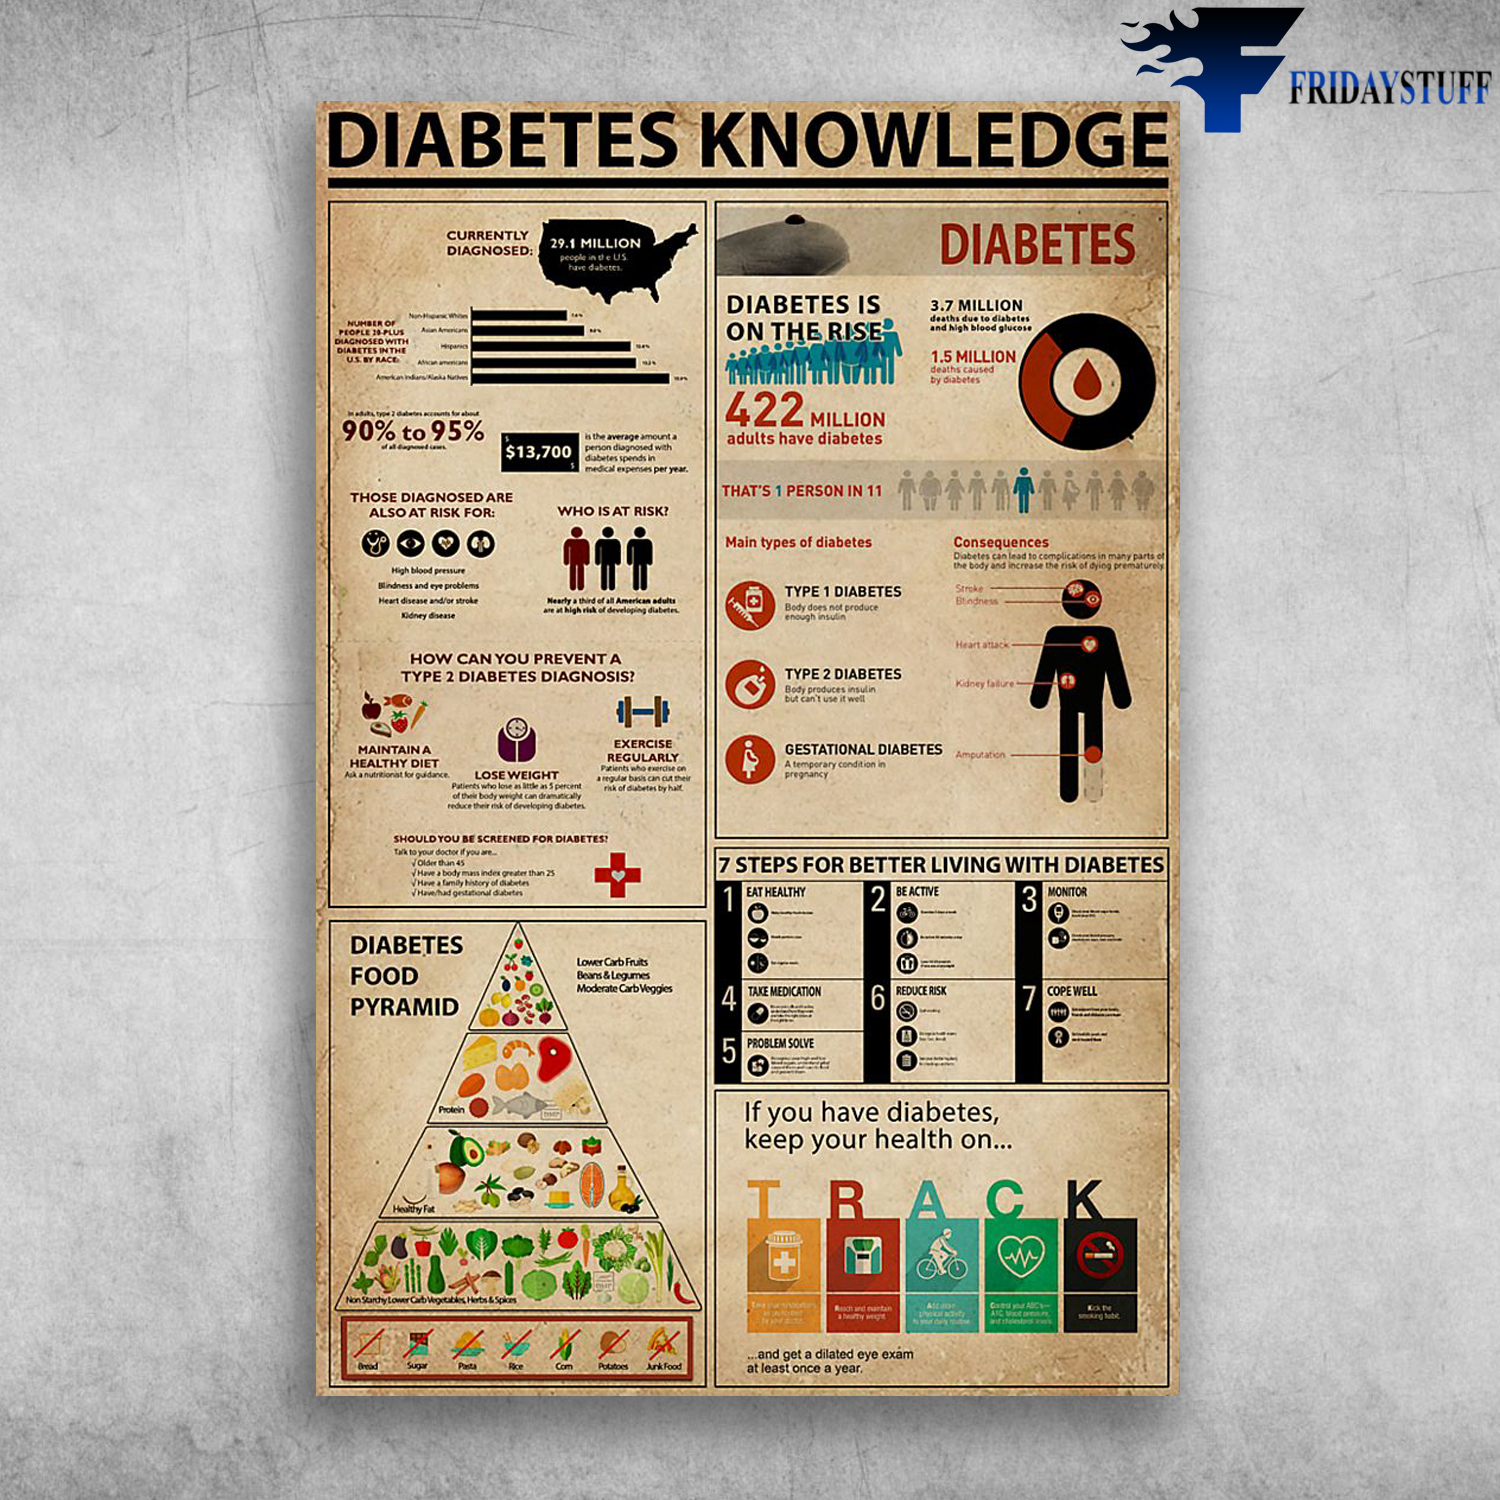 Diabetes Knowledge Seven Steps For Better Living With Diabetes